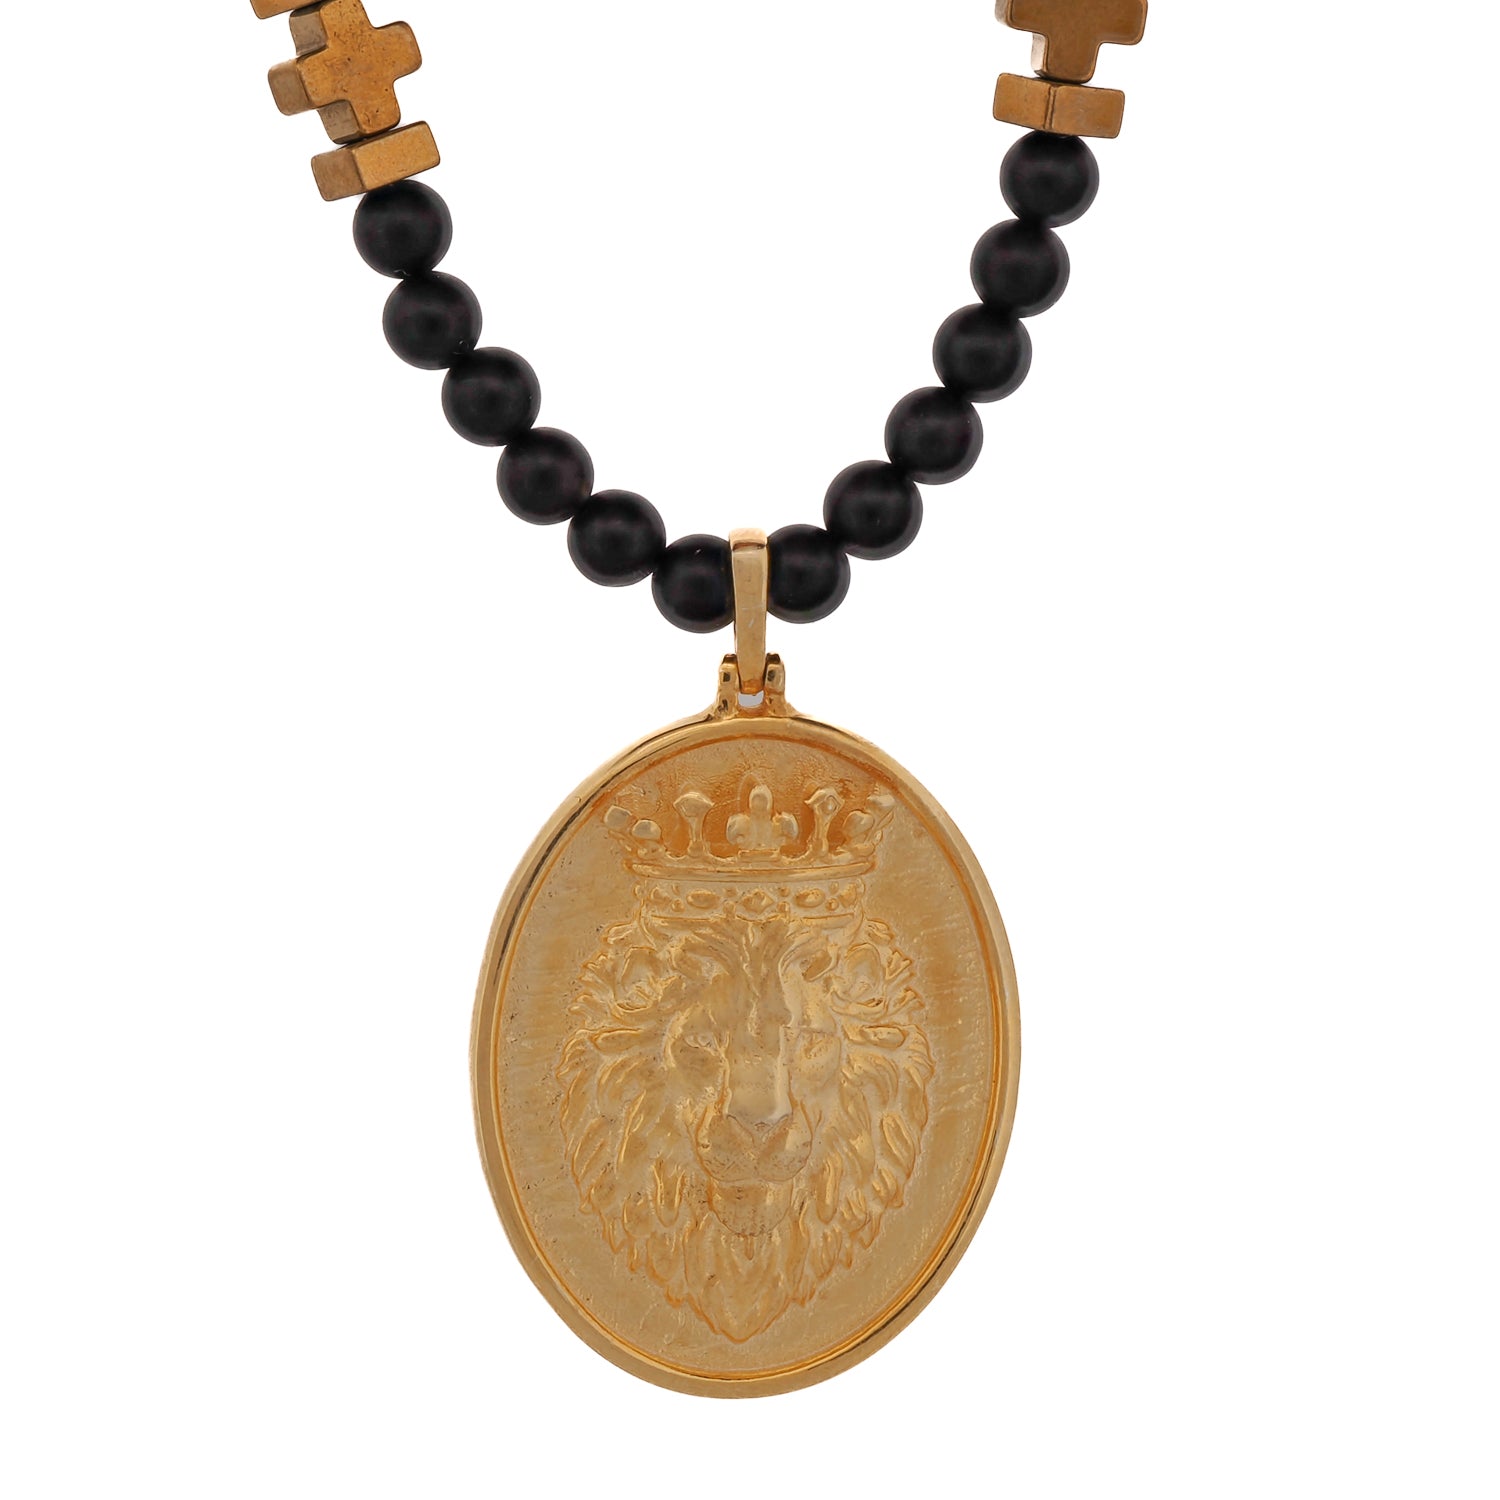 Elegant and bold Gold Powerful Lion Pendant Black Onyx Necklace, perfect for adding a sophisticated touch to any ensemble